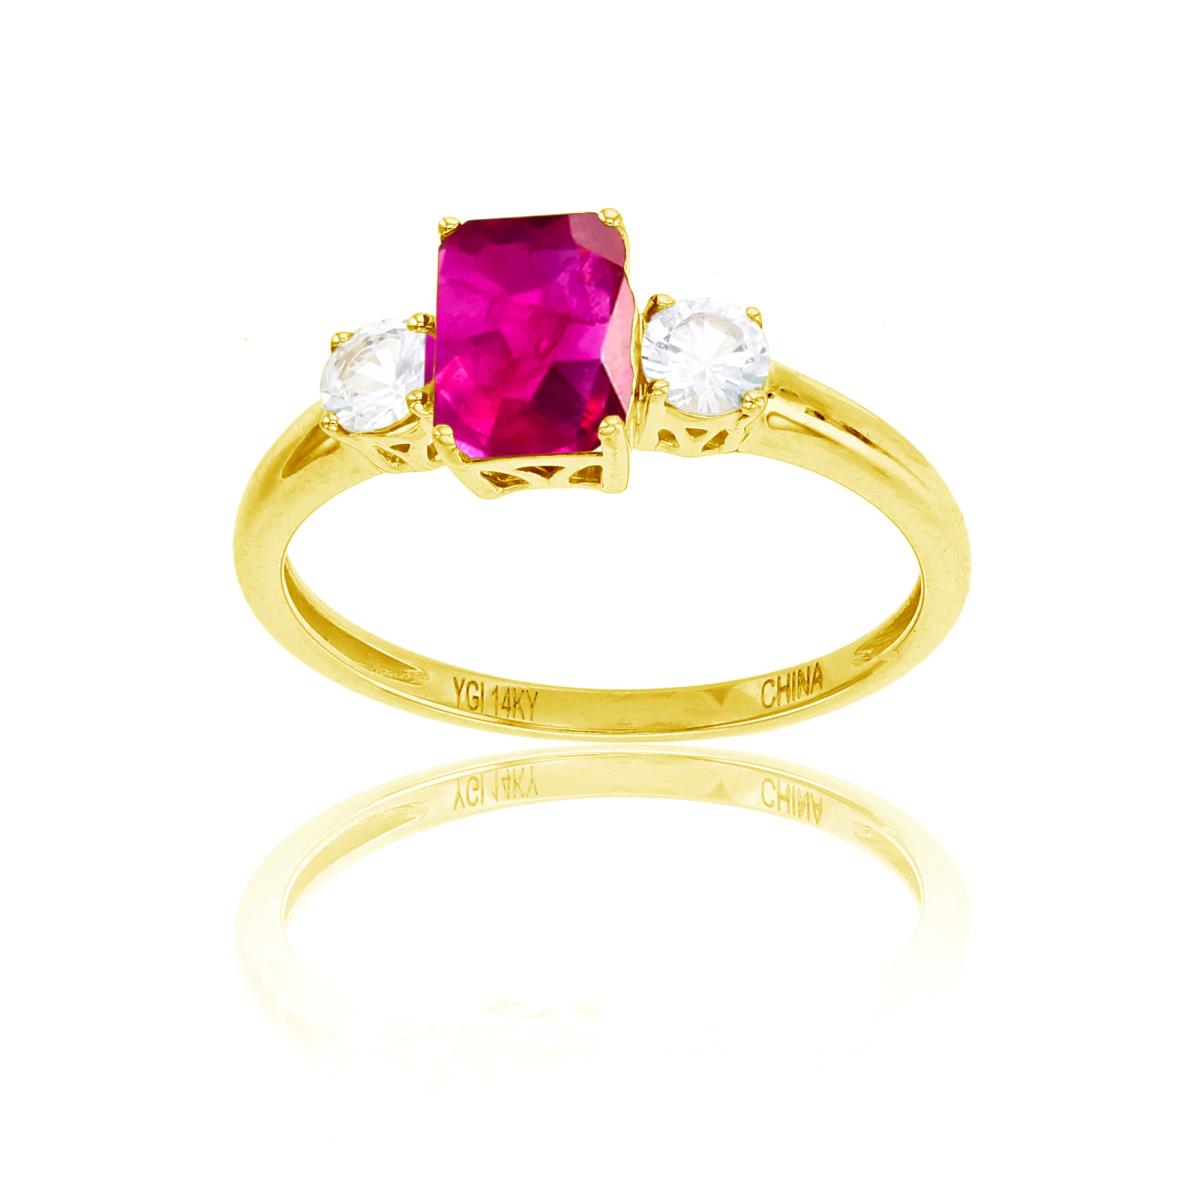 10K Yellow Gold 7x5mm Oct Glass Filled Ruby & 3.5mm Rnd White Topaz on Sides Ring